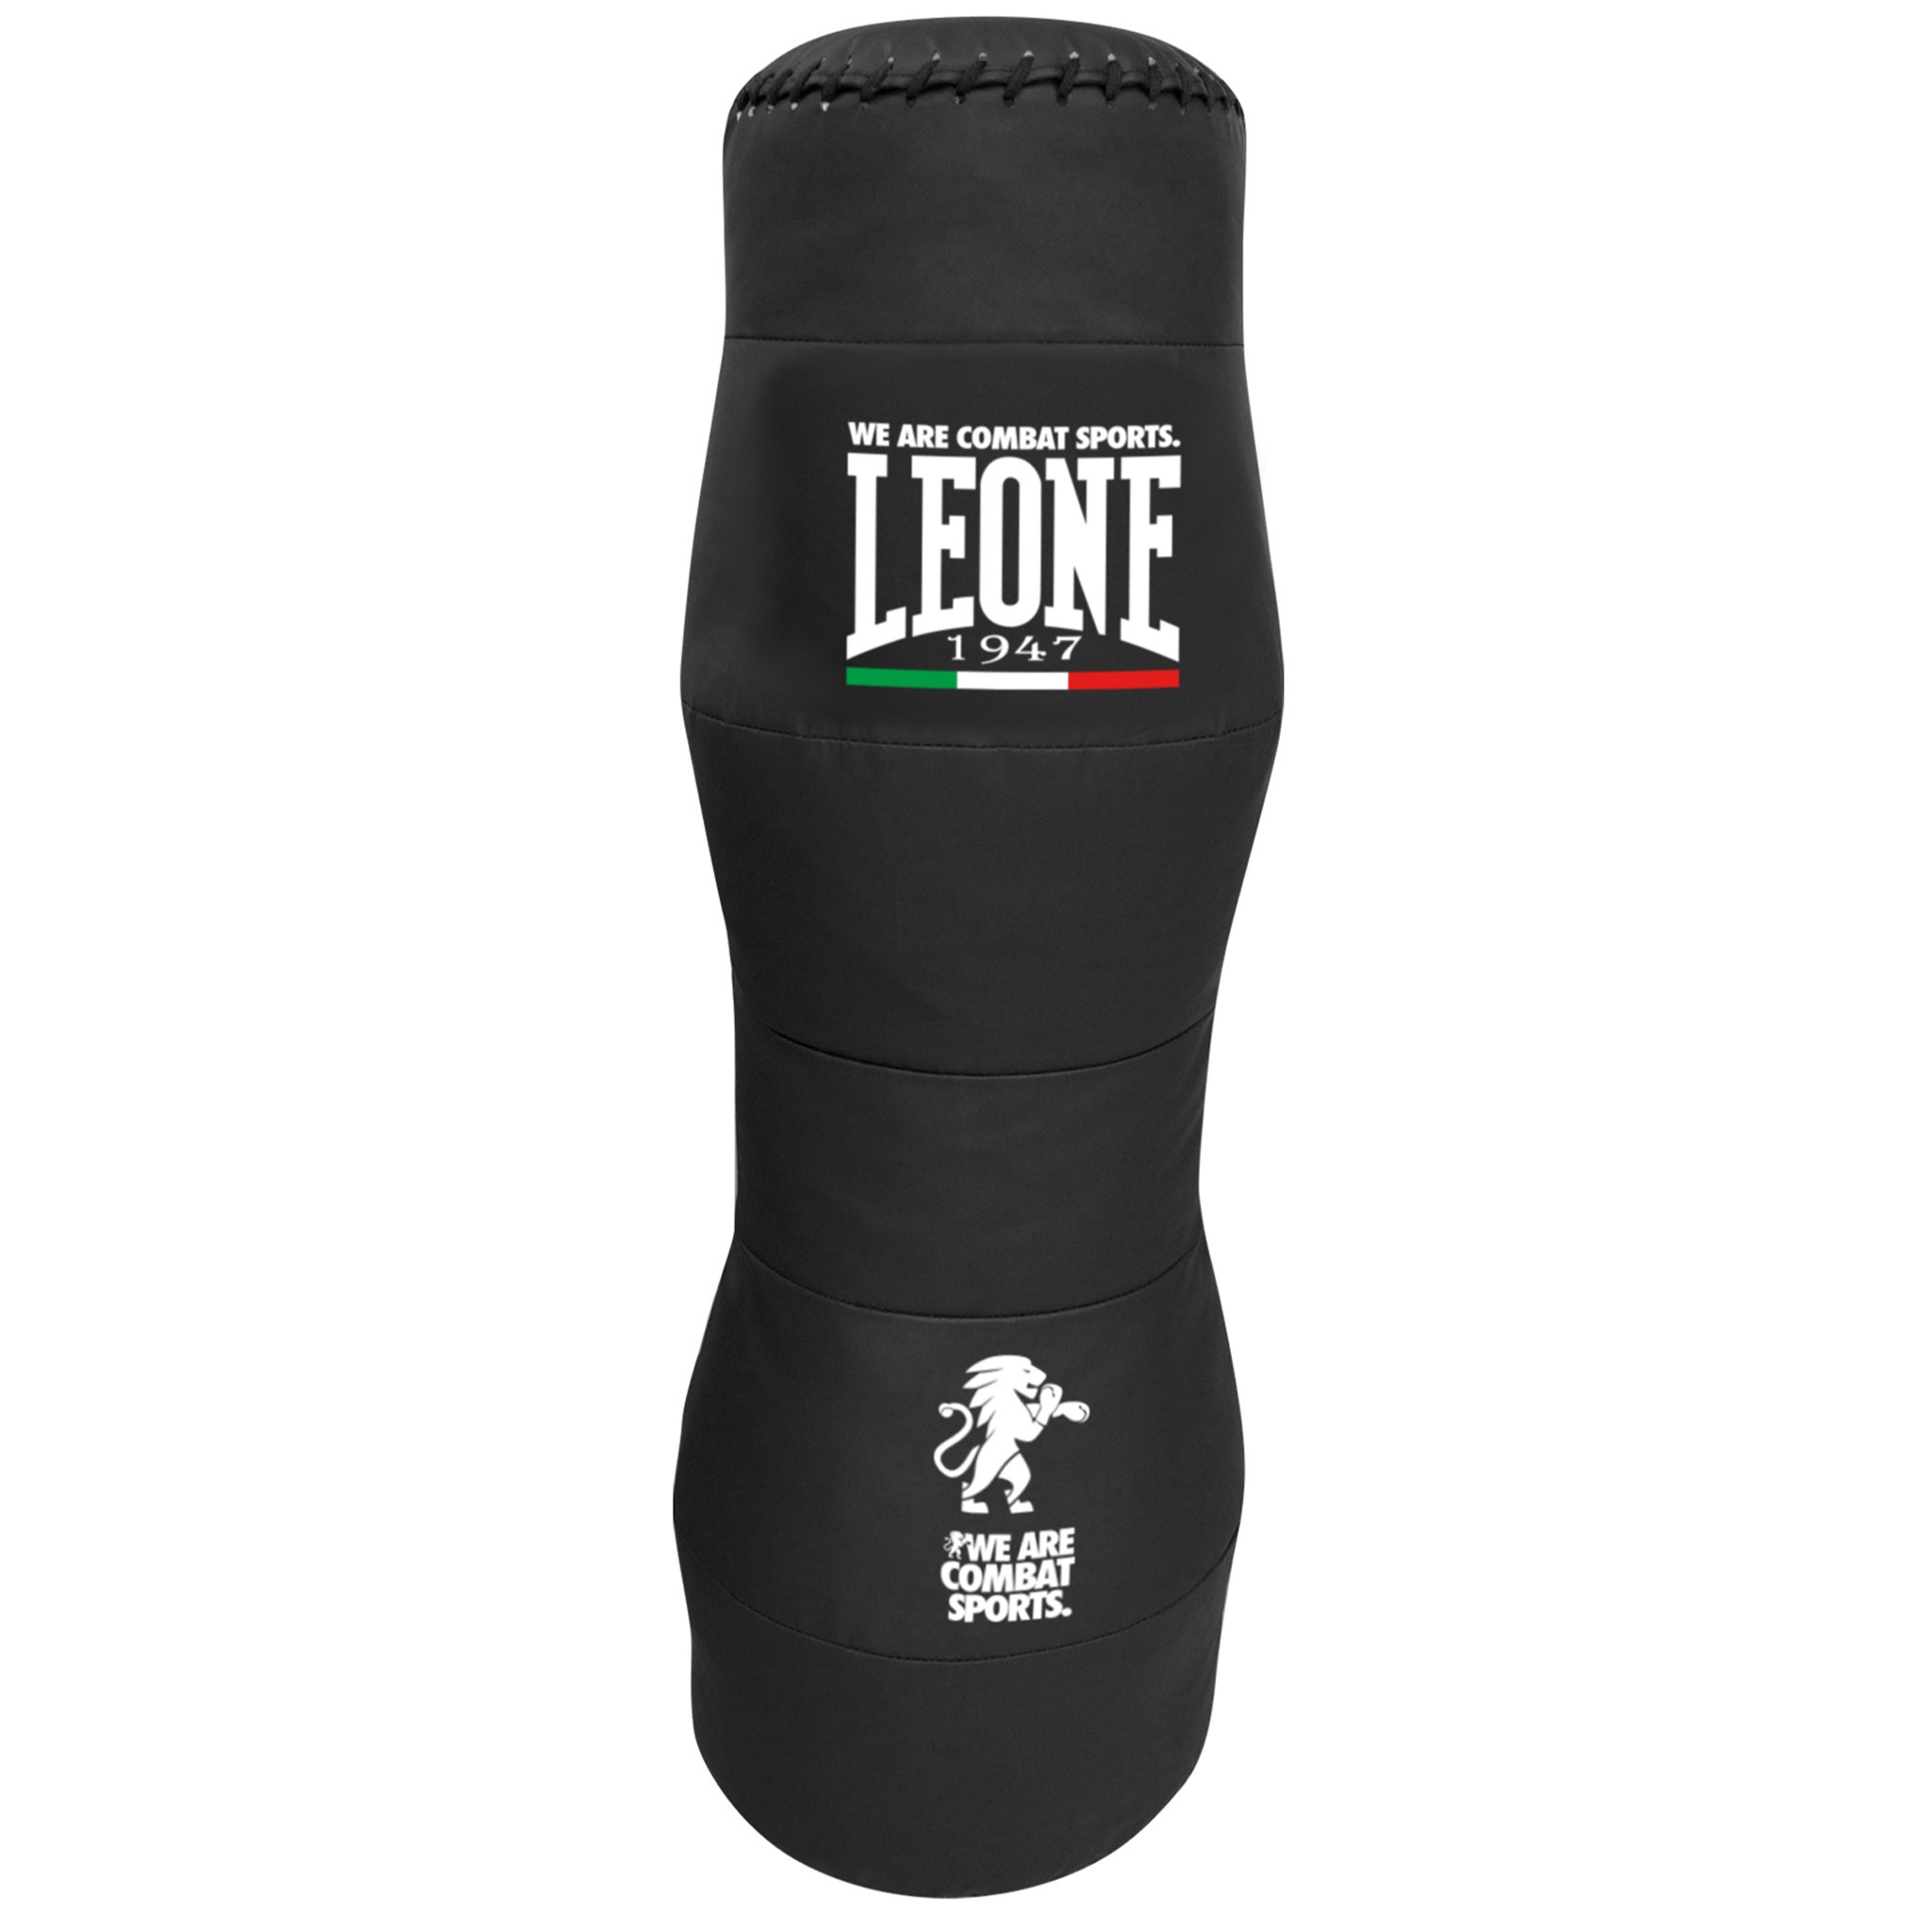 View our MMA HEAVY BAG Leone 1947 AT850 at Barbarians Fight Wear